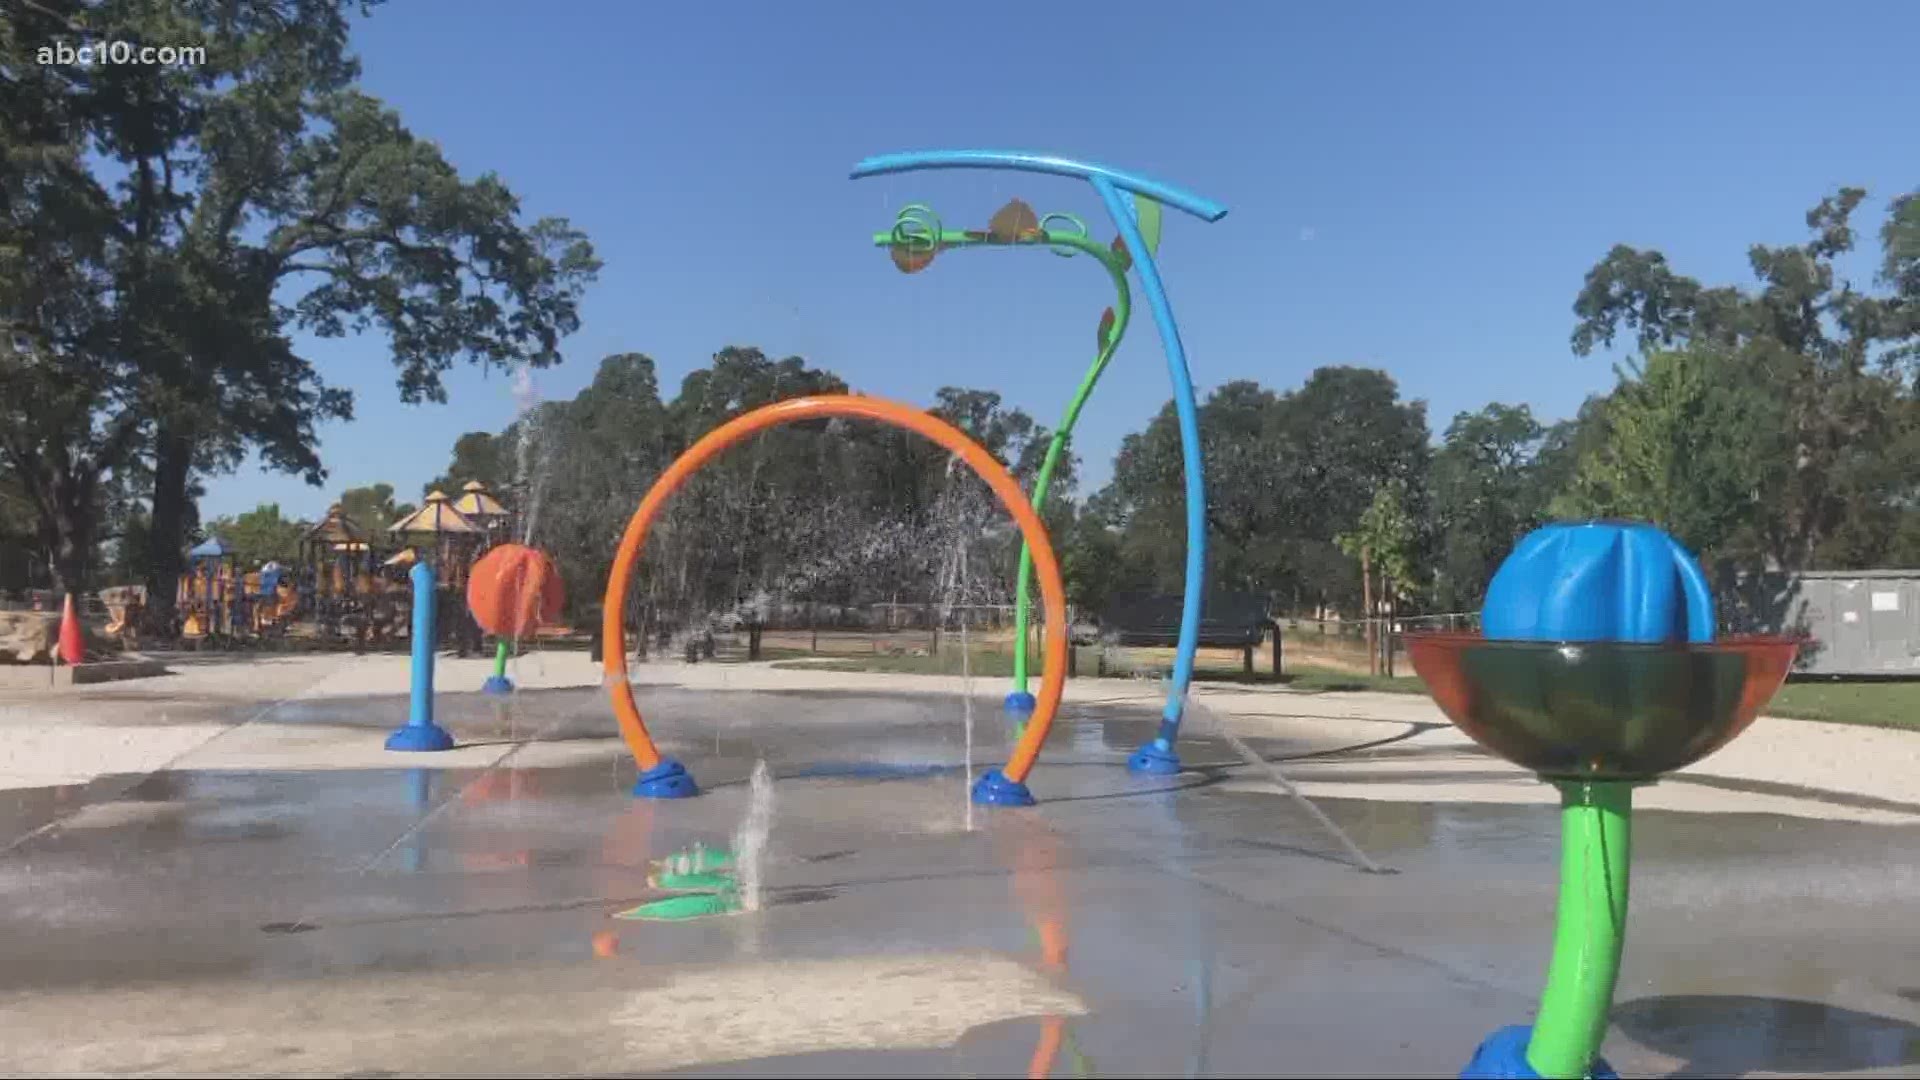 Rocklin is home to a brand new splash pad where families can go to cool off and have a little fun under the sun.